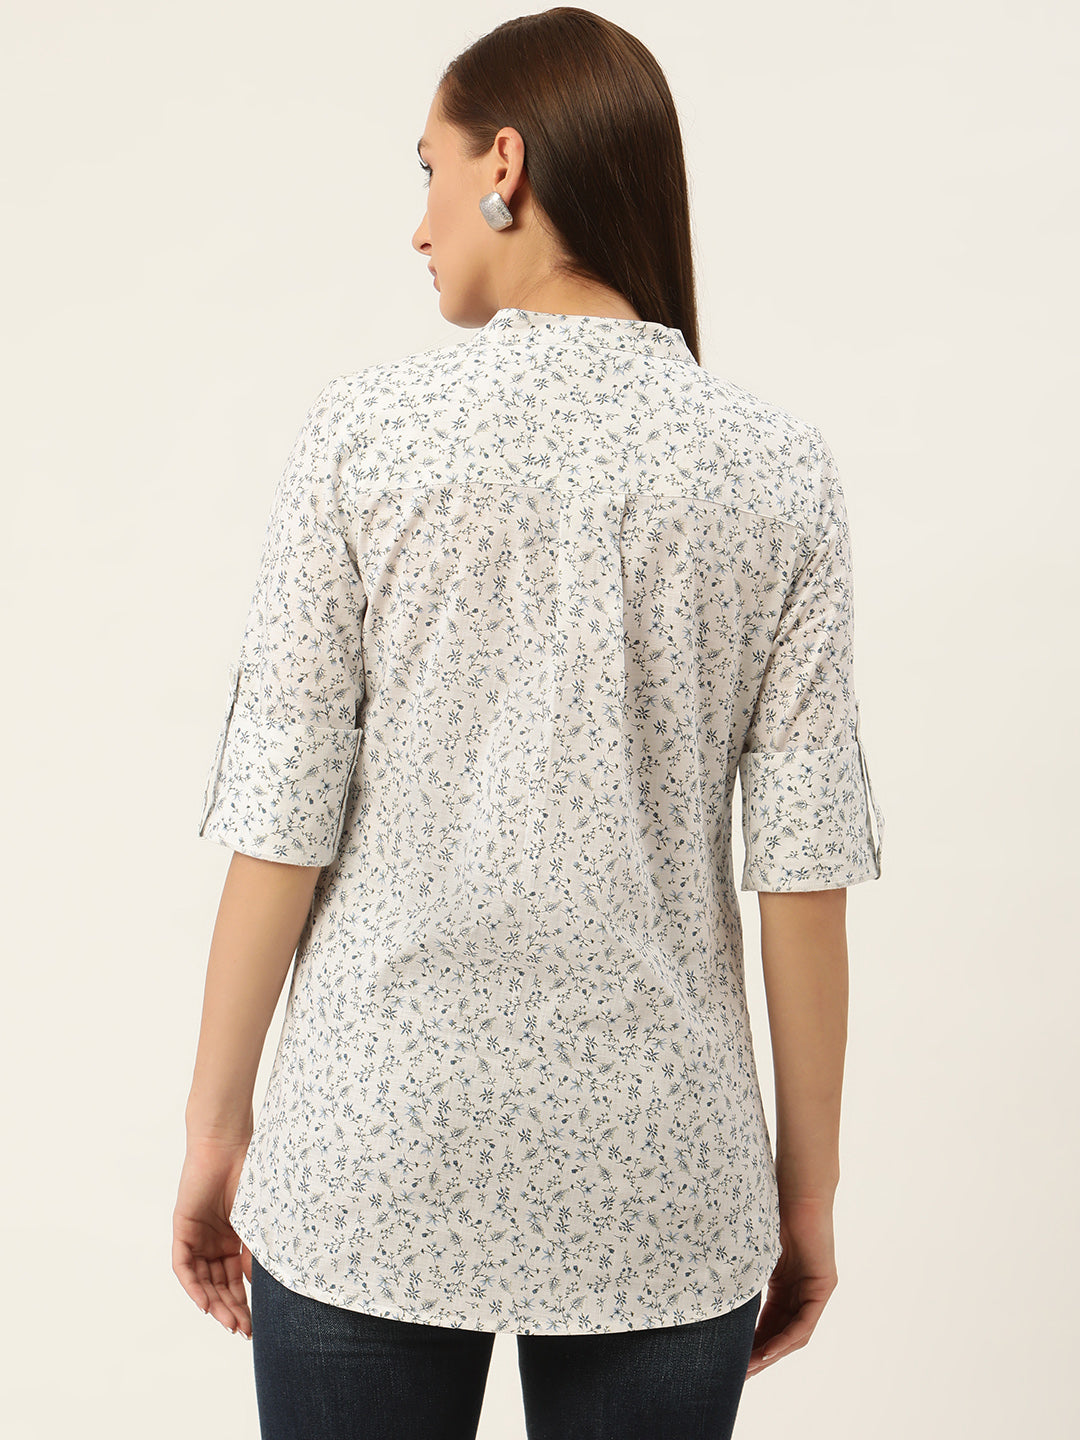 Off White & Grey Floral Print Roll-Up Sleeves Shirt Style Top